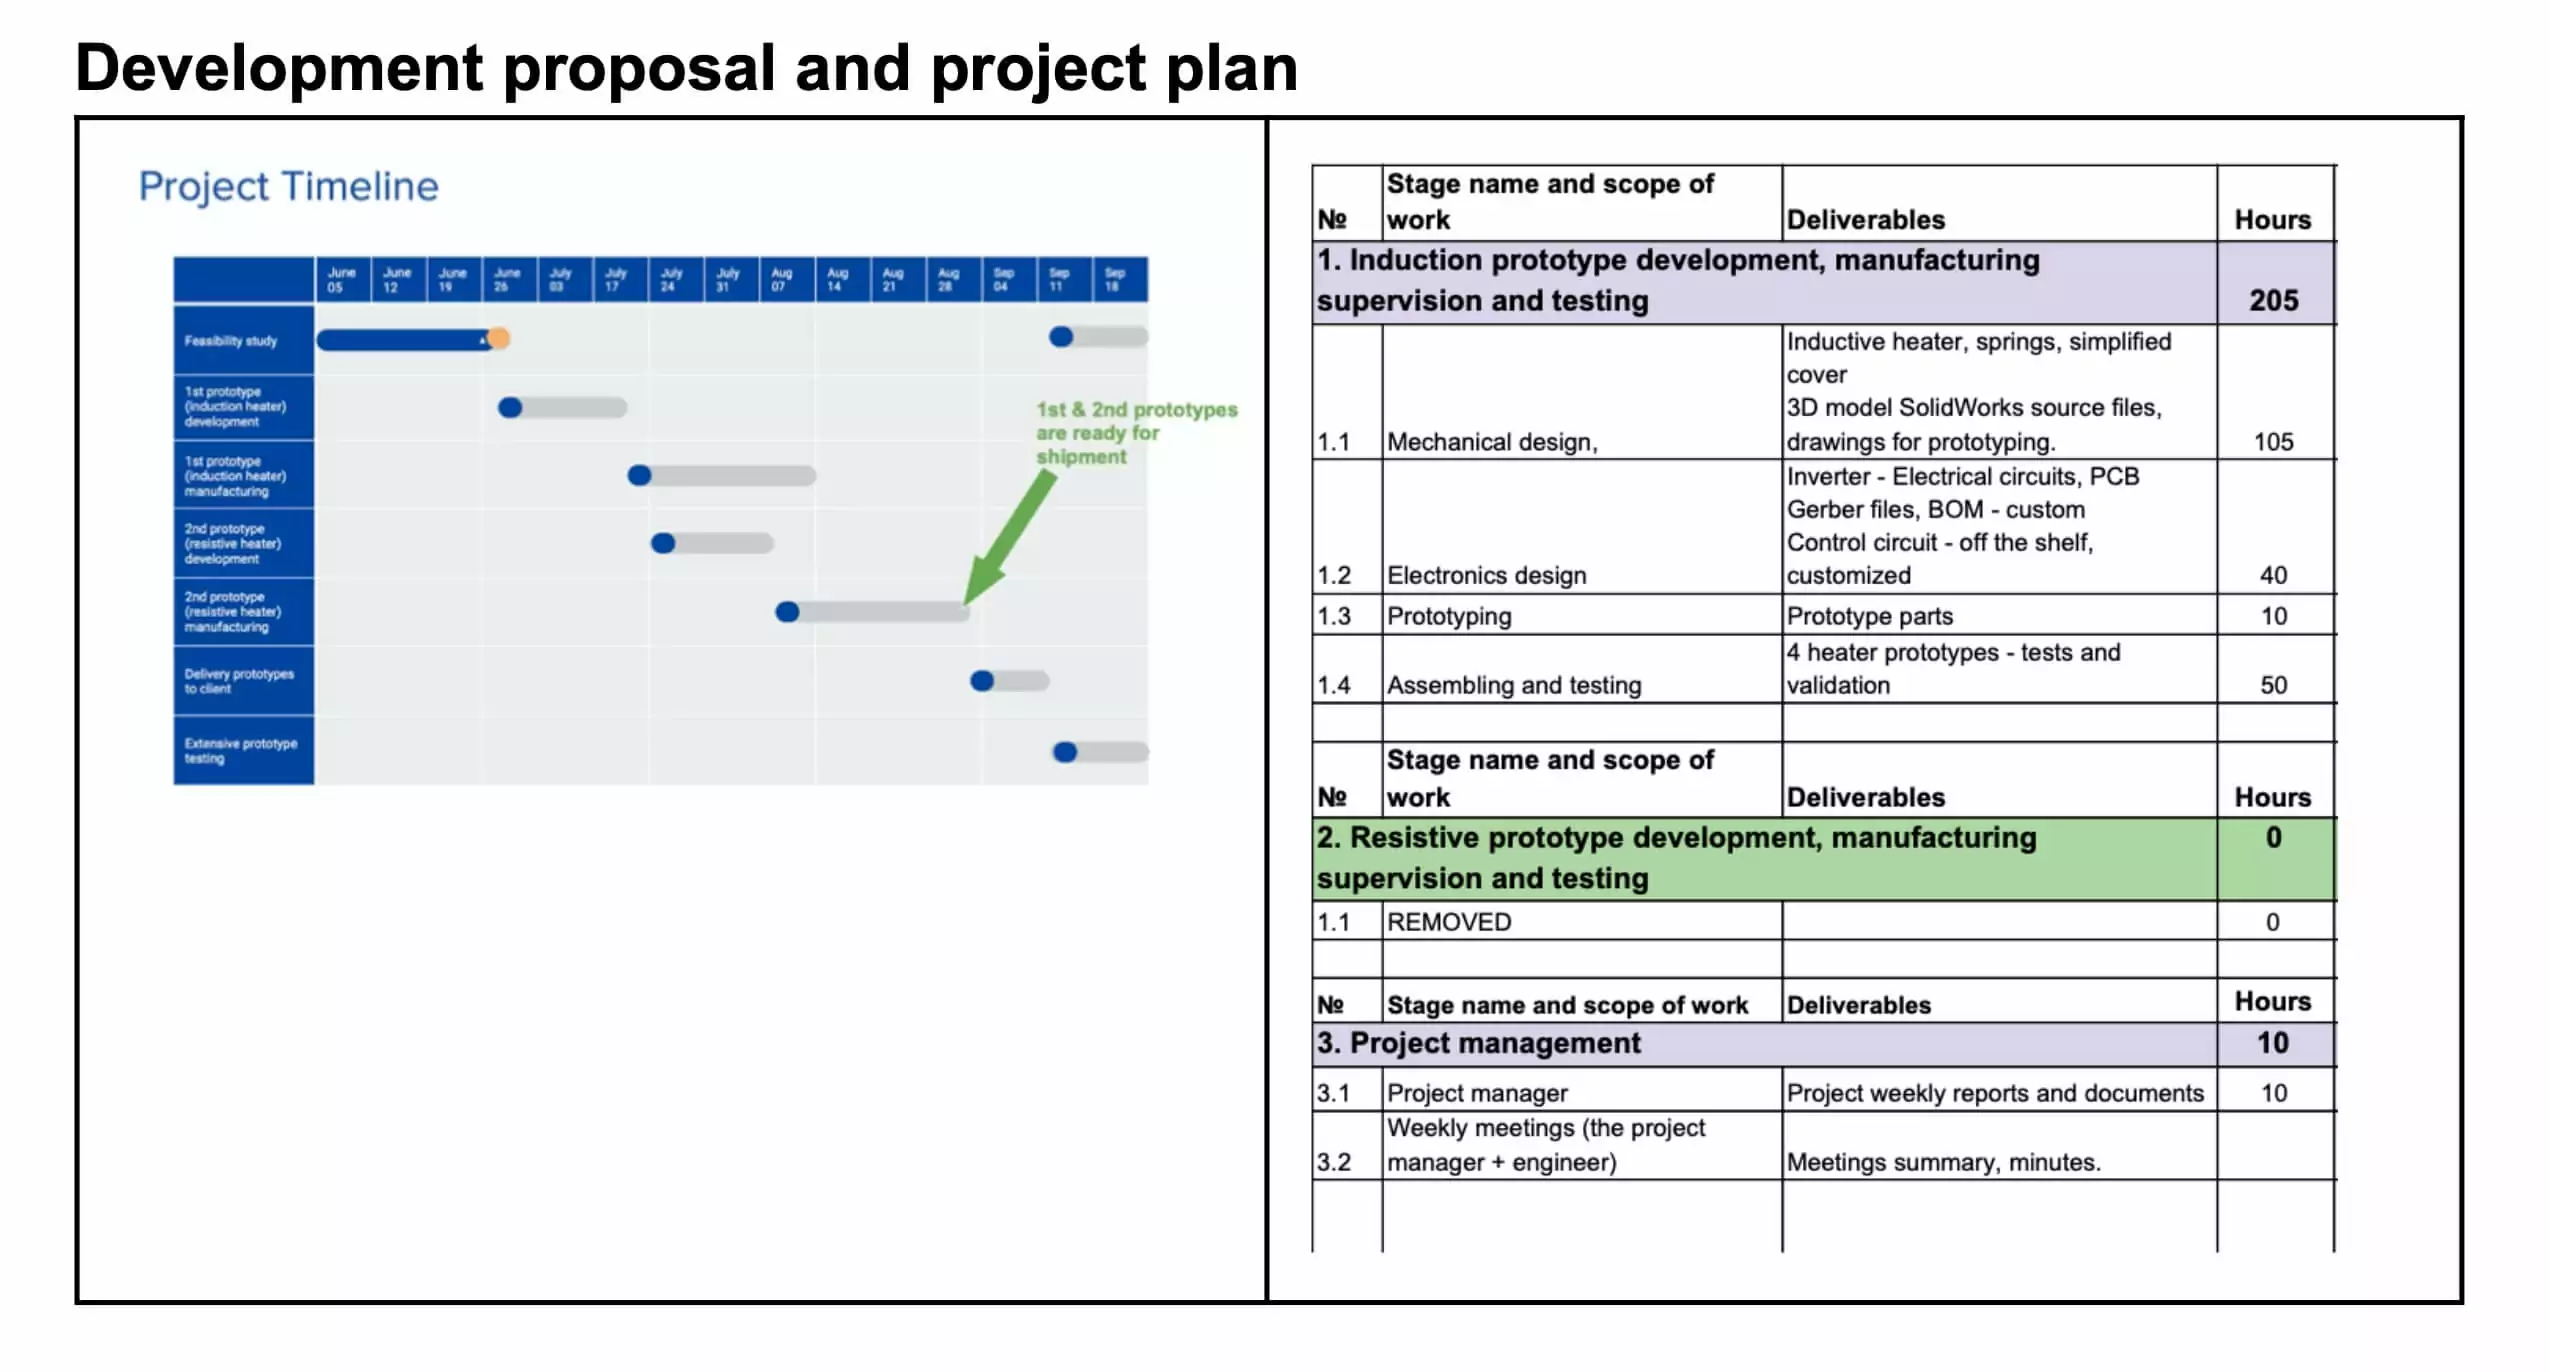 Development proposal and project plan